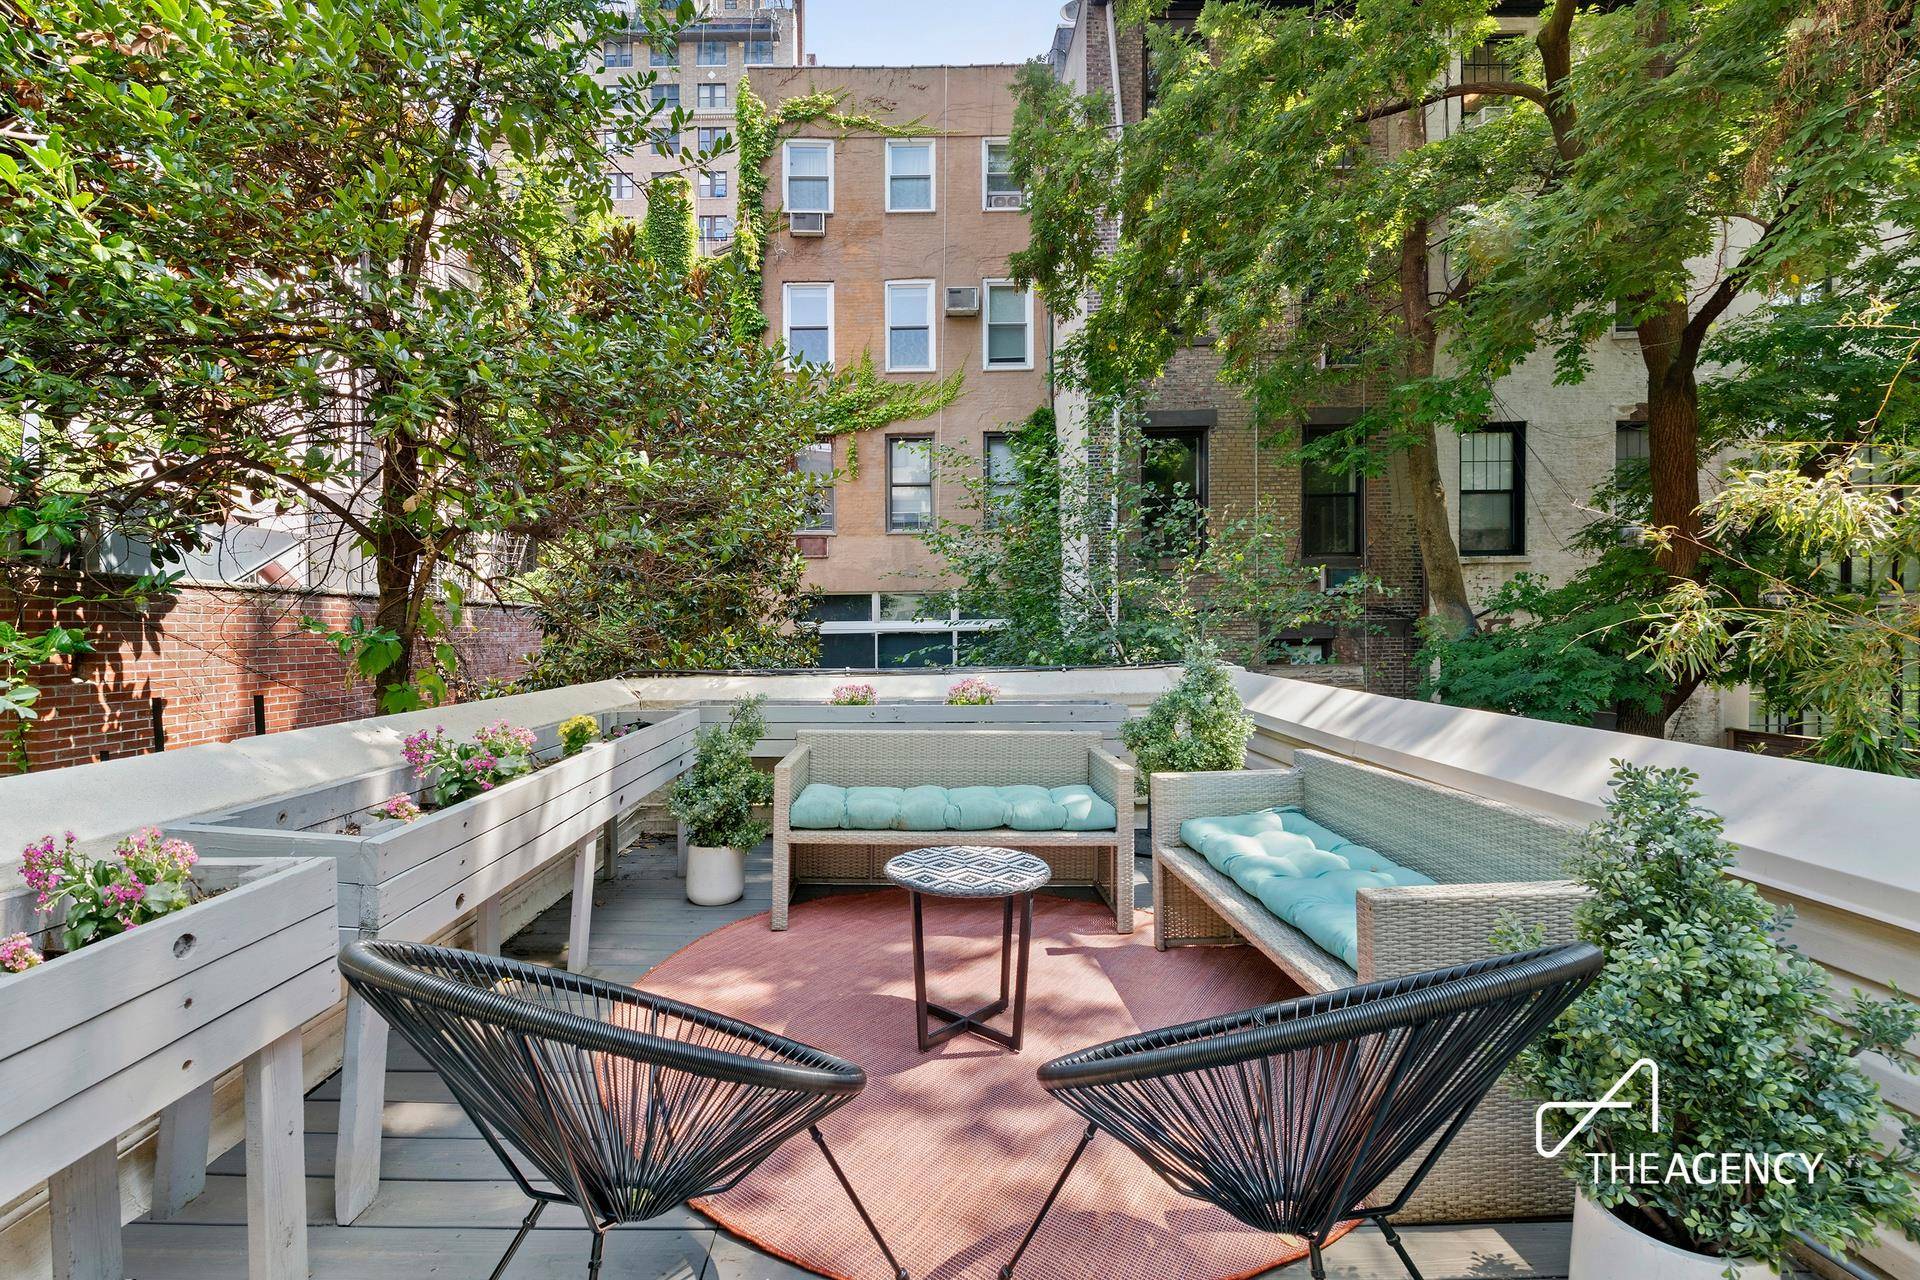 The perfect escape in the middle of one of Manhattan s most iconic neighborhoods awaits you !